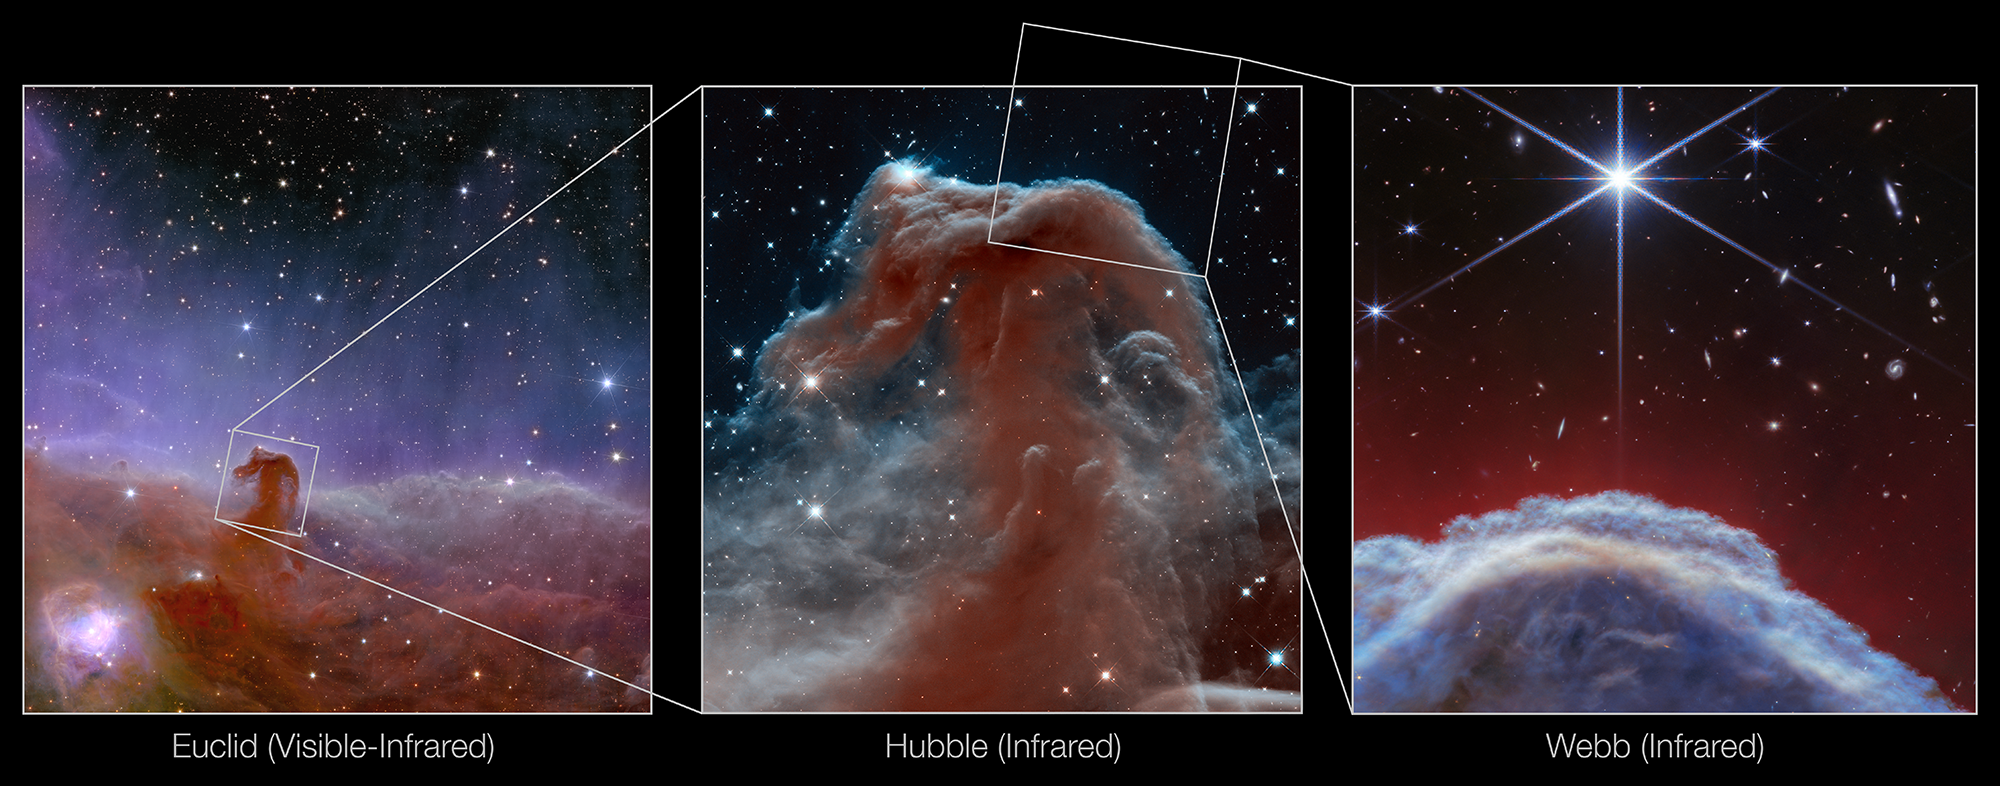 A horizontal collage of three images of the Horsehead Nebula. The left image is labeled “Euclid (Visible-Infrared)” and shows a dusty red-brown nebula at bottom with wispy blue clouds in the middle and the black background of space at top, with stars throughout. A portion of the nebula shaped like the head of a seahorse juts upward from the thickest part of the nebula into the blue wisps. A small box around it connects to the second image labeled “Hubble (Infrared)”, where the Nebula is zoomed in on. Here the central part of the horse’s head remains a dark, dusty red, while the outer portions become a translucent, ethereal gray. At the top of the horse’s head, a box connects to the third image labeled “Webb (Infrared)”. A clumpy dome of blueish-gray clouds rises about a third of the way into the image, capped with translucent red wisps and, at top, a single, prominent star.